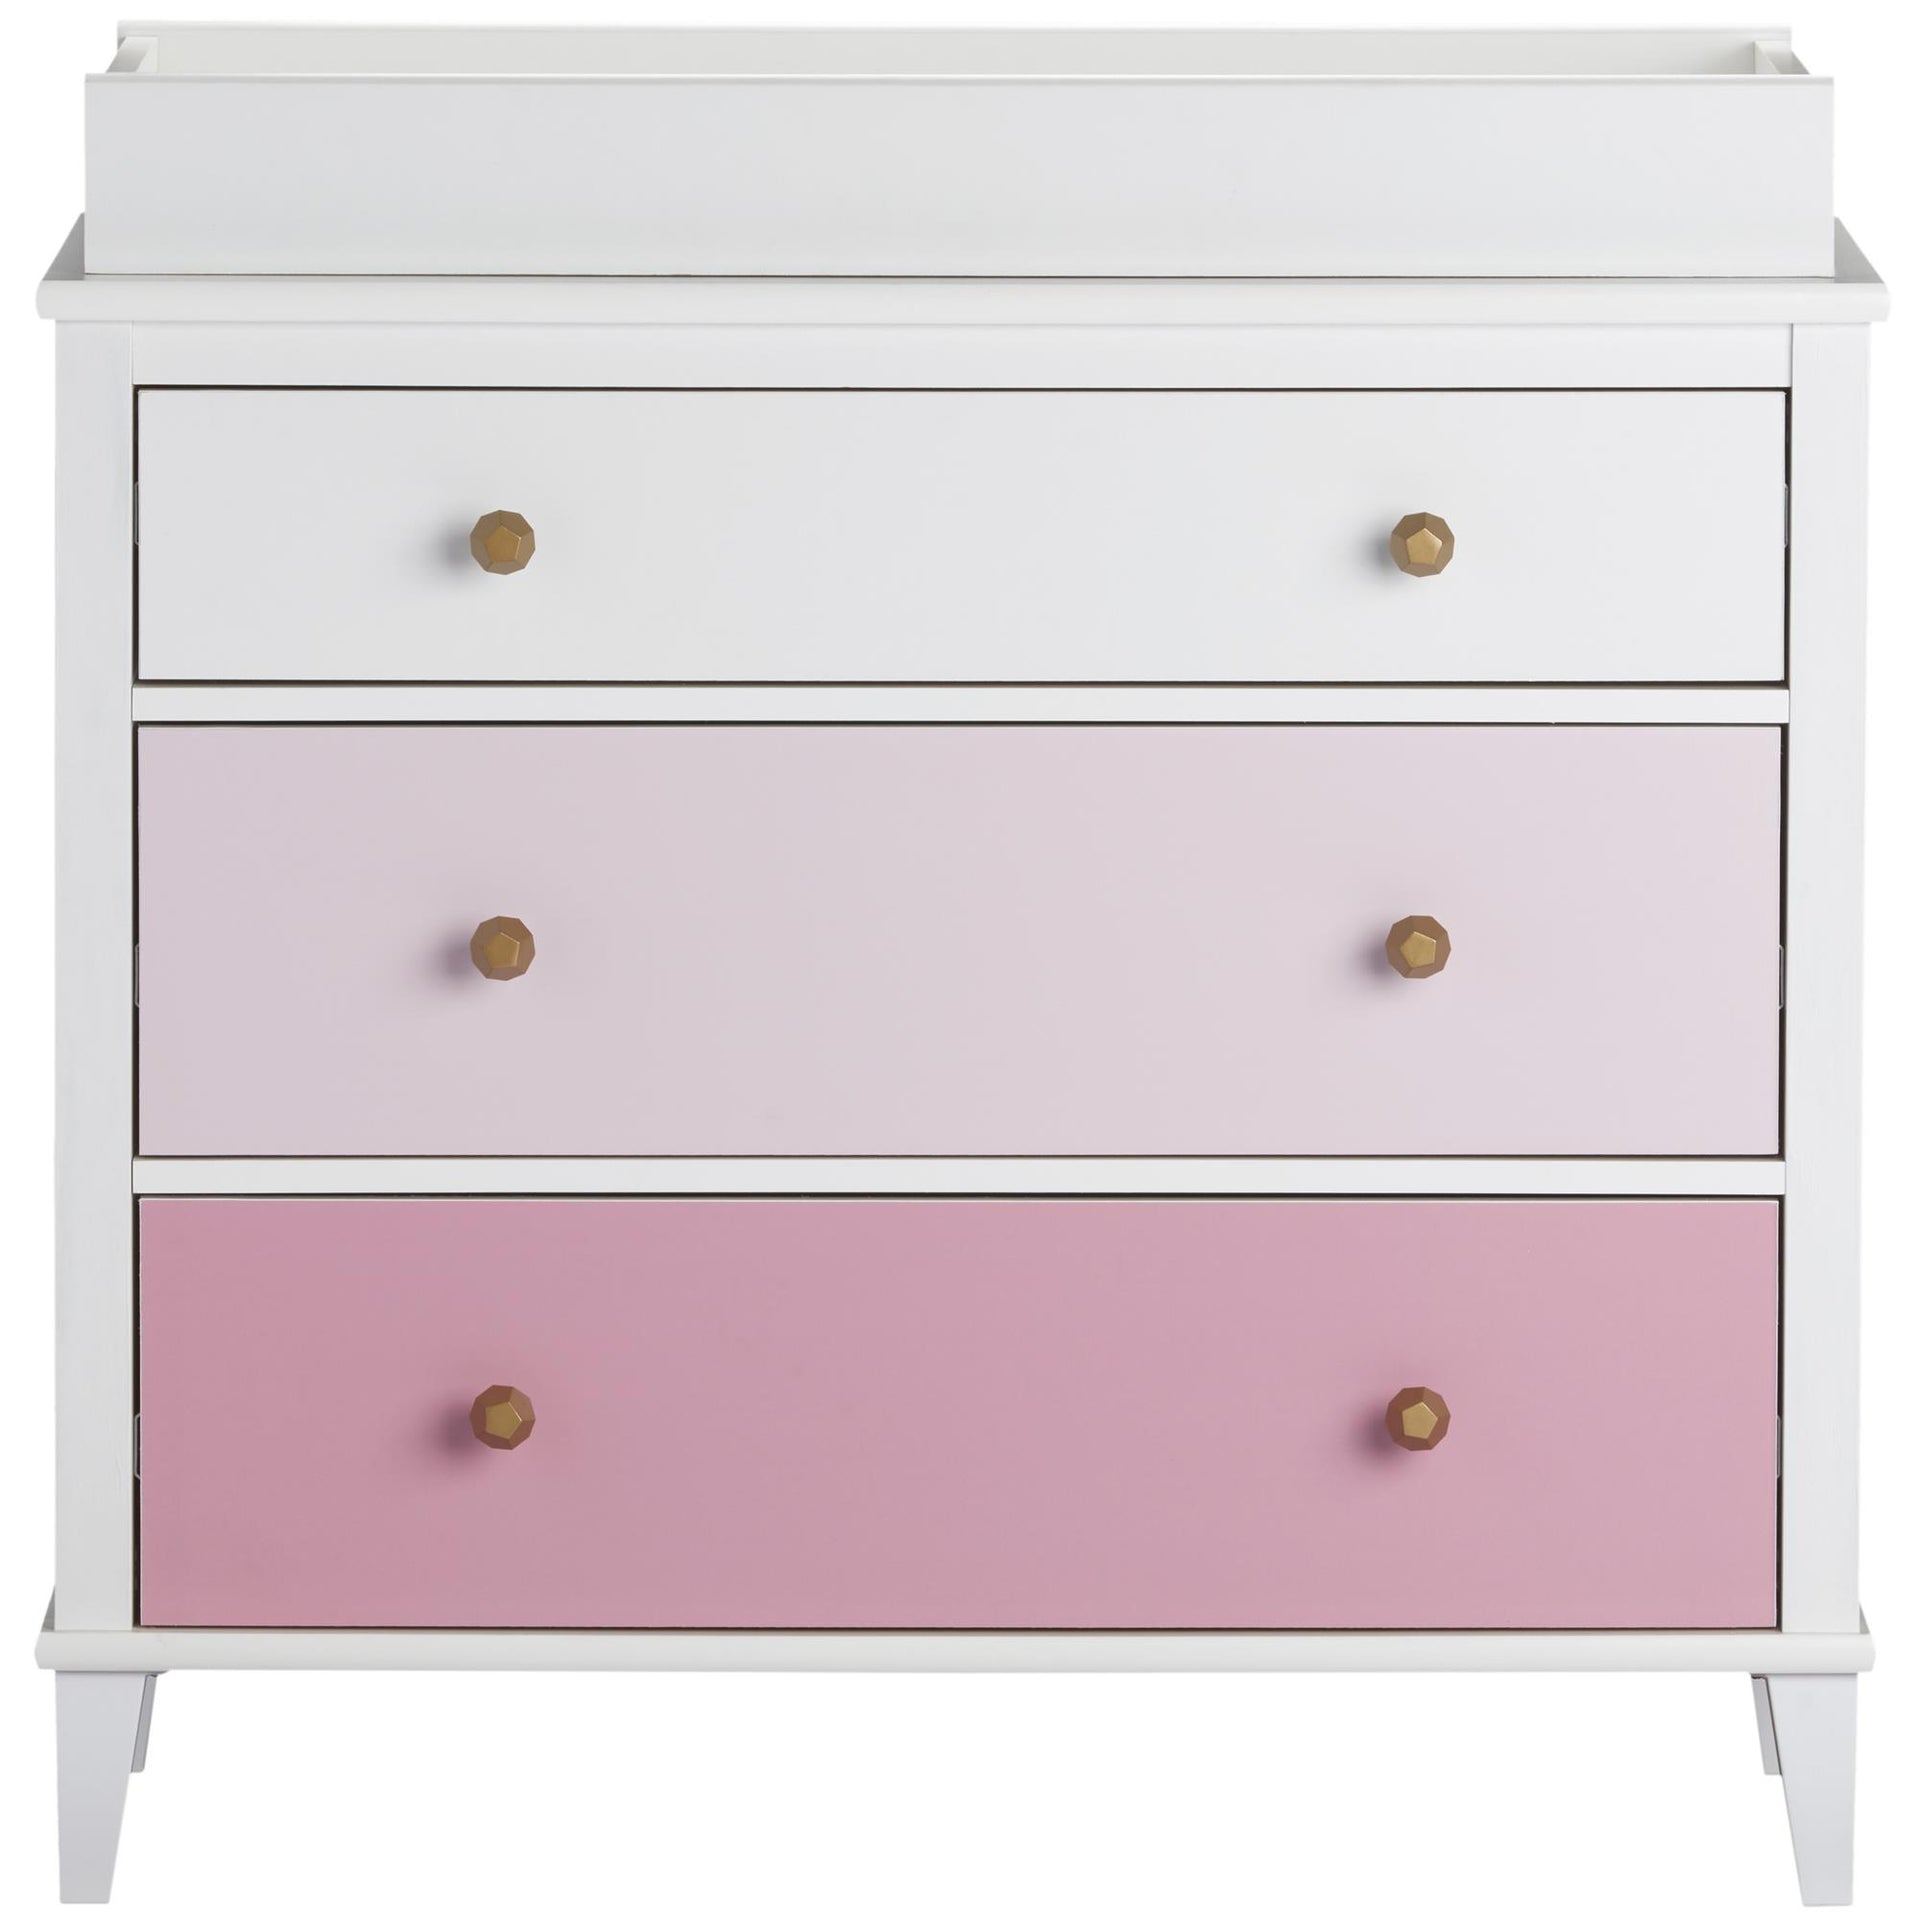 Monarch Hill Poppy 3 Drawer Changing Table - Pink